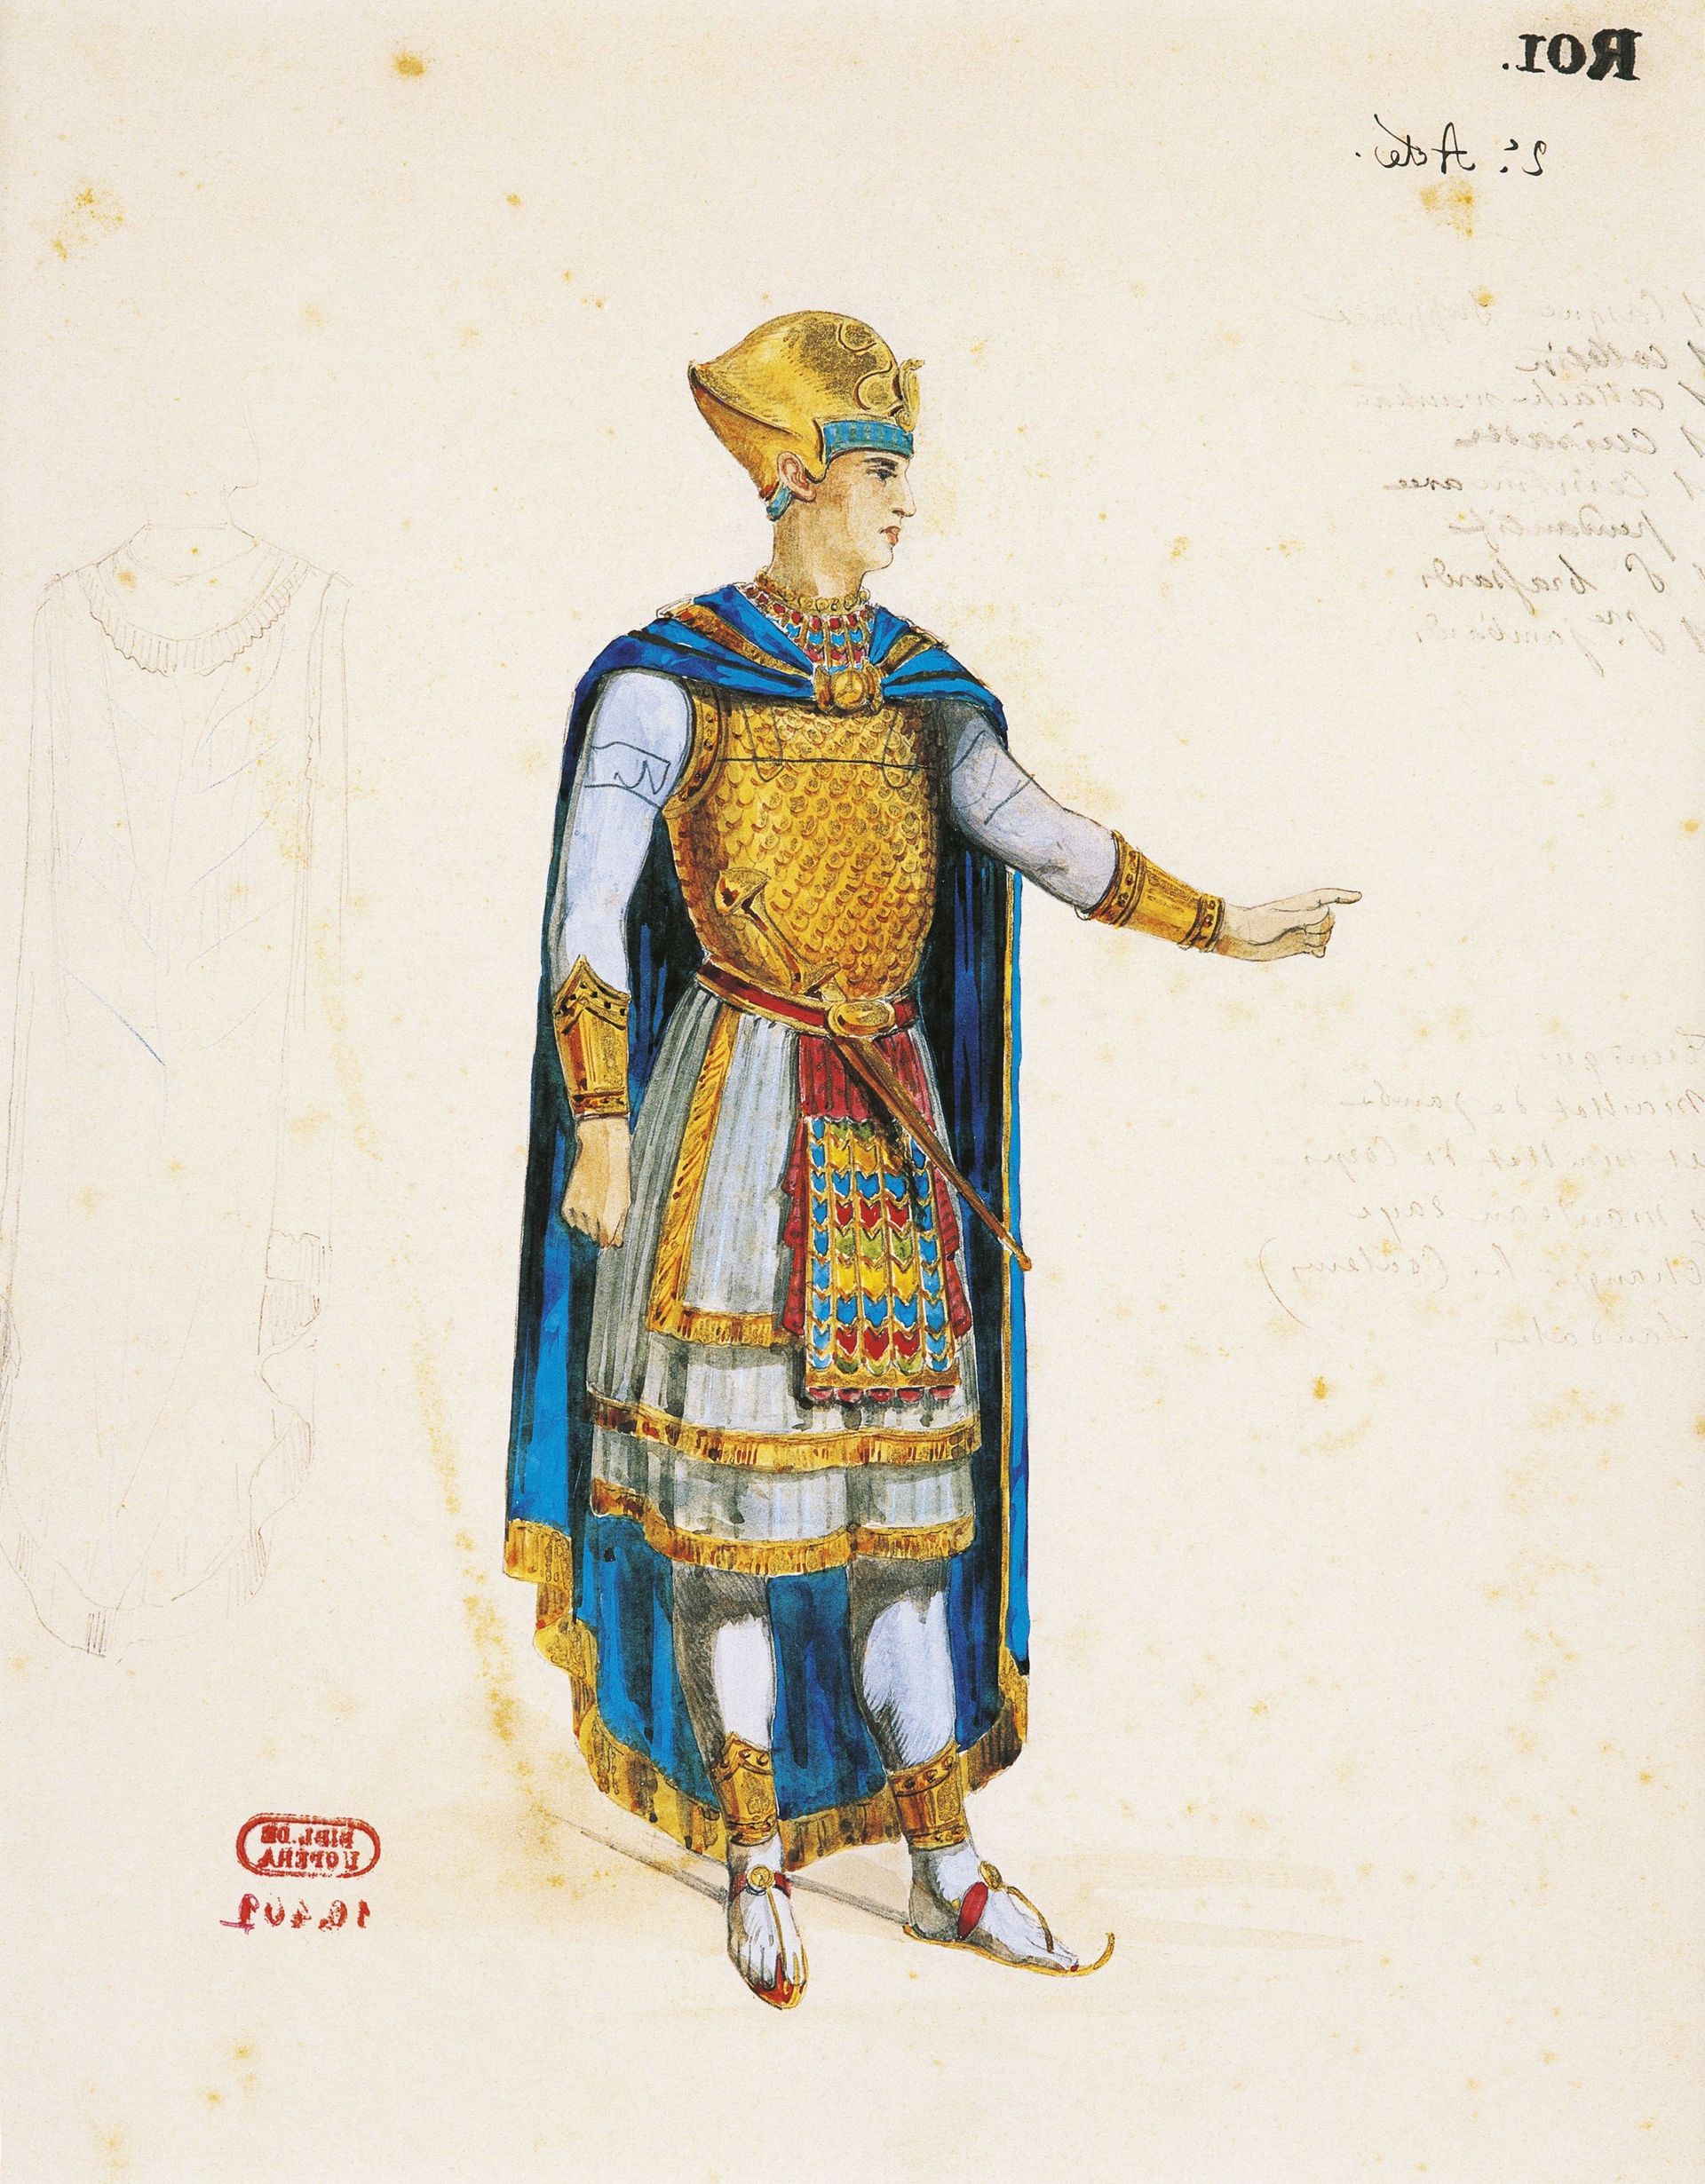 France, Paris, Costume sketch for the King in Aida by Giuseppe Verdi for the Premiere at Khedivial Opera House in Cairo